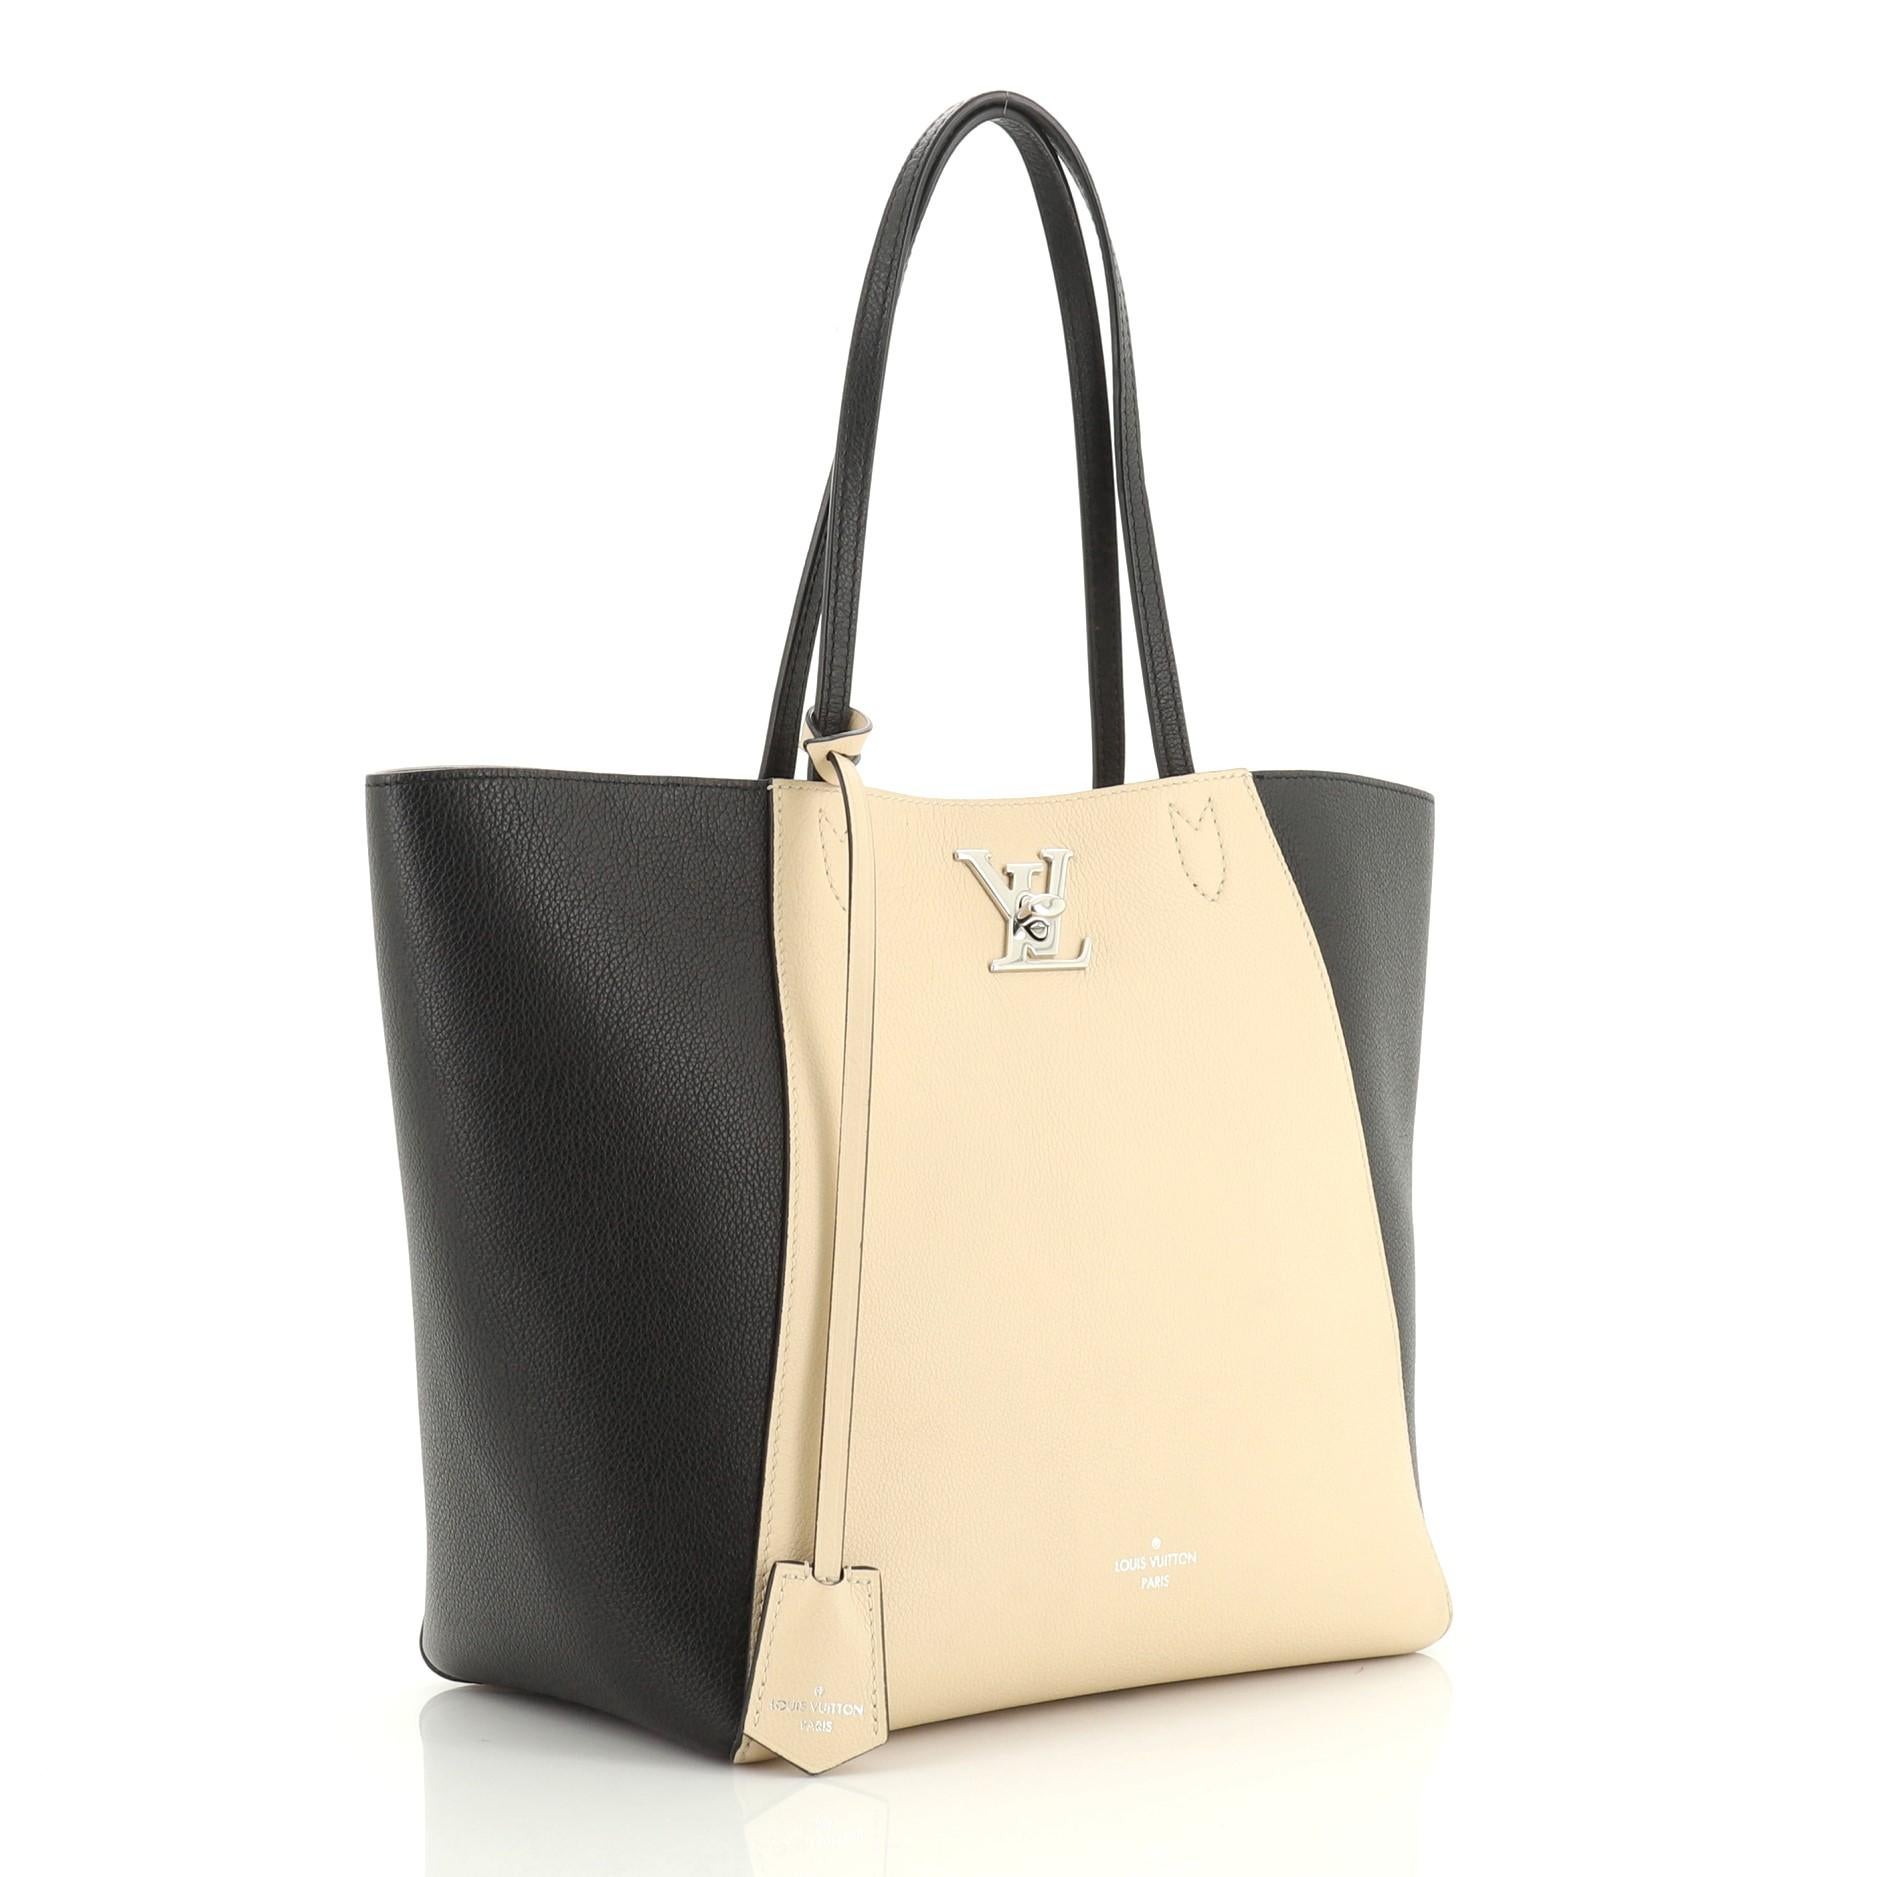 This Louis Vuitton Lockme Cabas Leather, crafted from black and neutral leather, features dual slim leather handles and silver-tone hardware. Its LV turn-lock closure opens to a neutral microfiber interior with zip and slip pockets. Authenticity